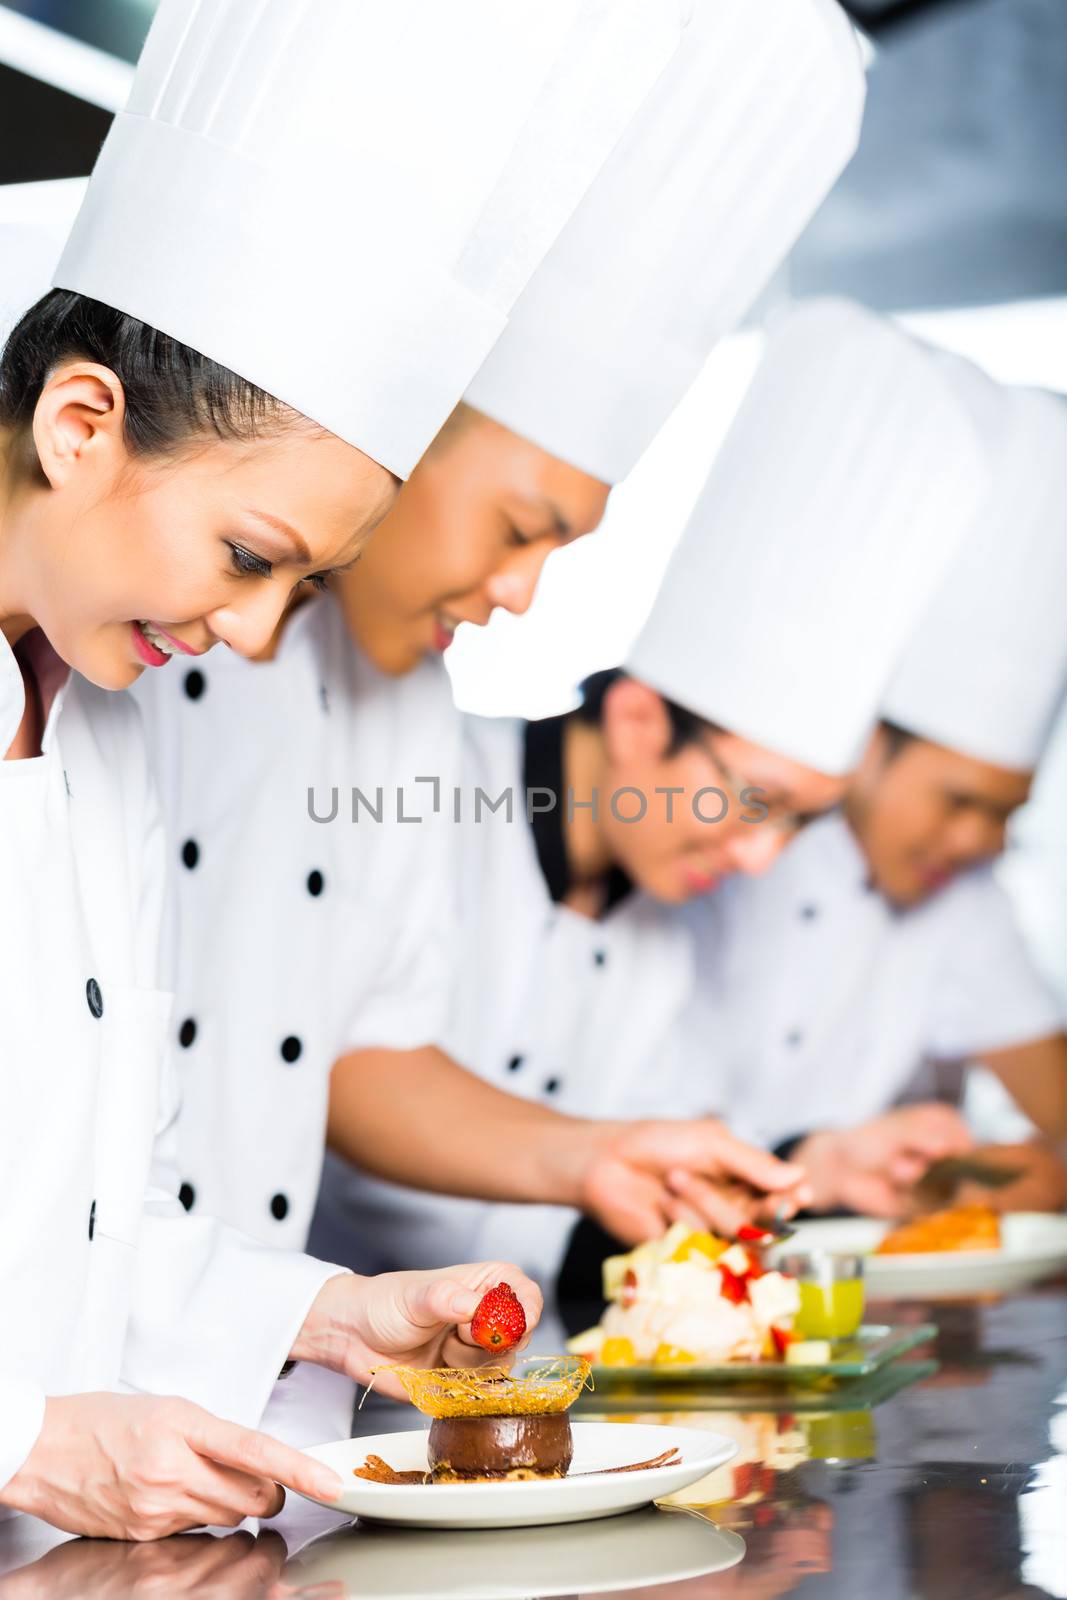 Asian Indonesian chef along with other cooks in restaurant or hotel kitchen cooking, finishing dish or plate for dessert